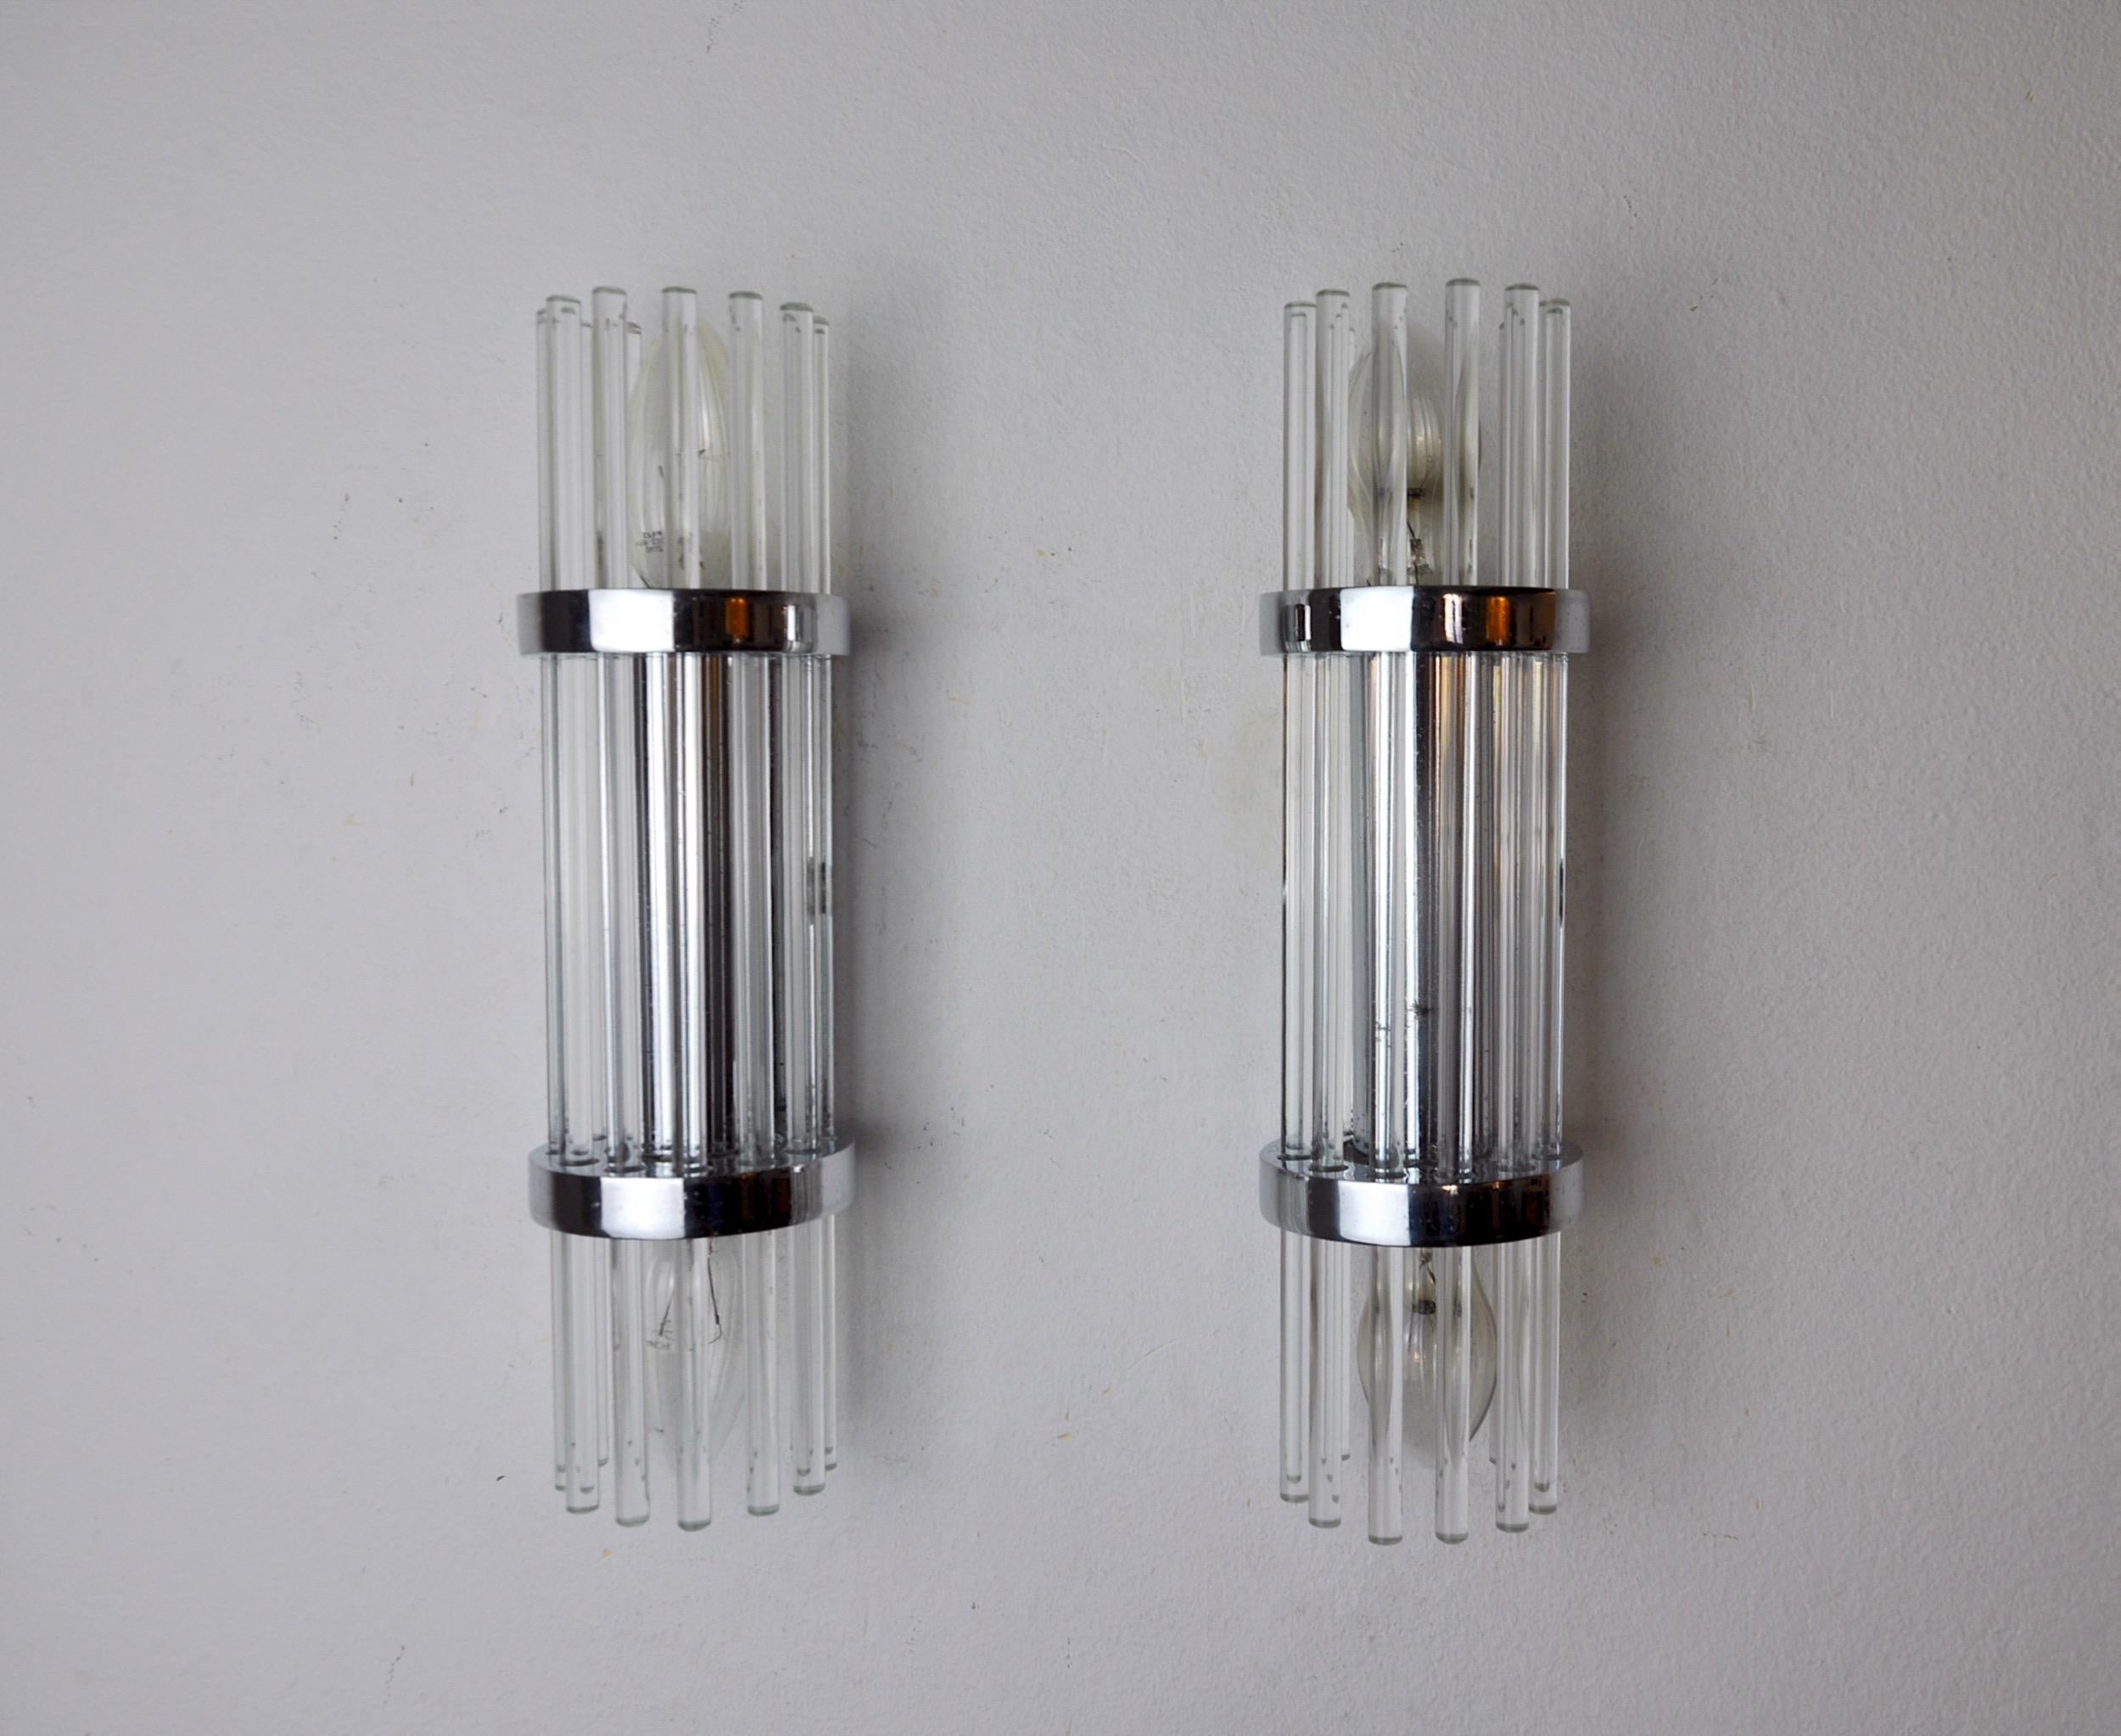 Hollywood Regency Pair of Sciolari Wall Lamps, Murano Glass, Italy, 1970 For Sale